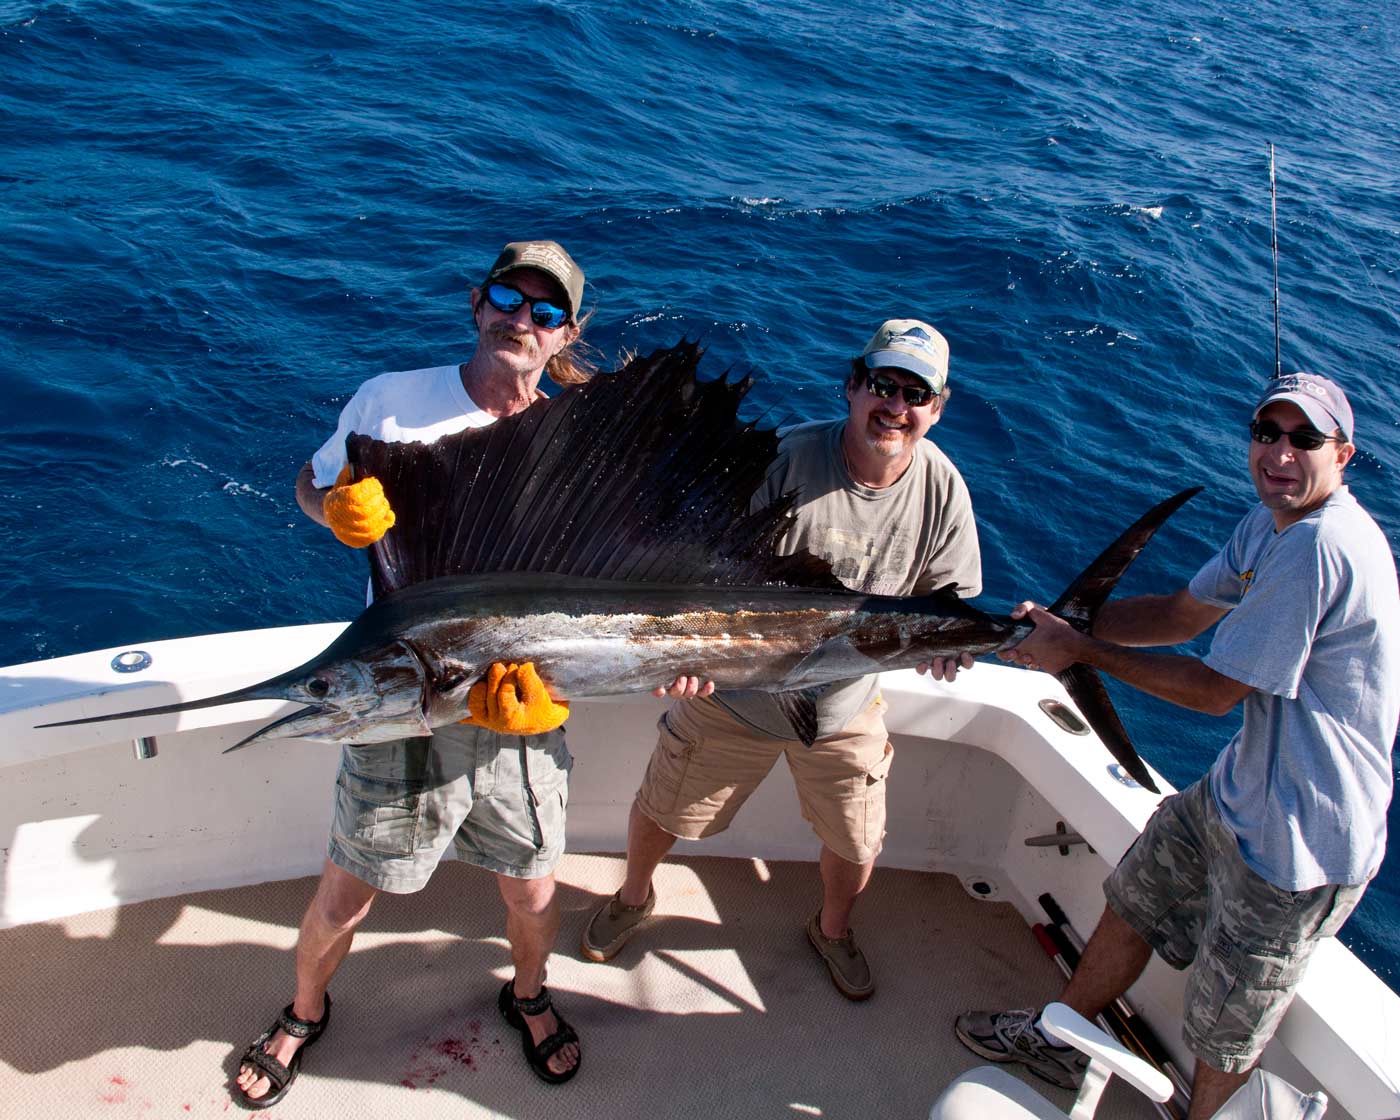 Lon helps Kevin hold his sailfish for pictures